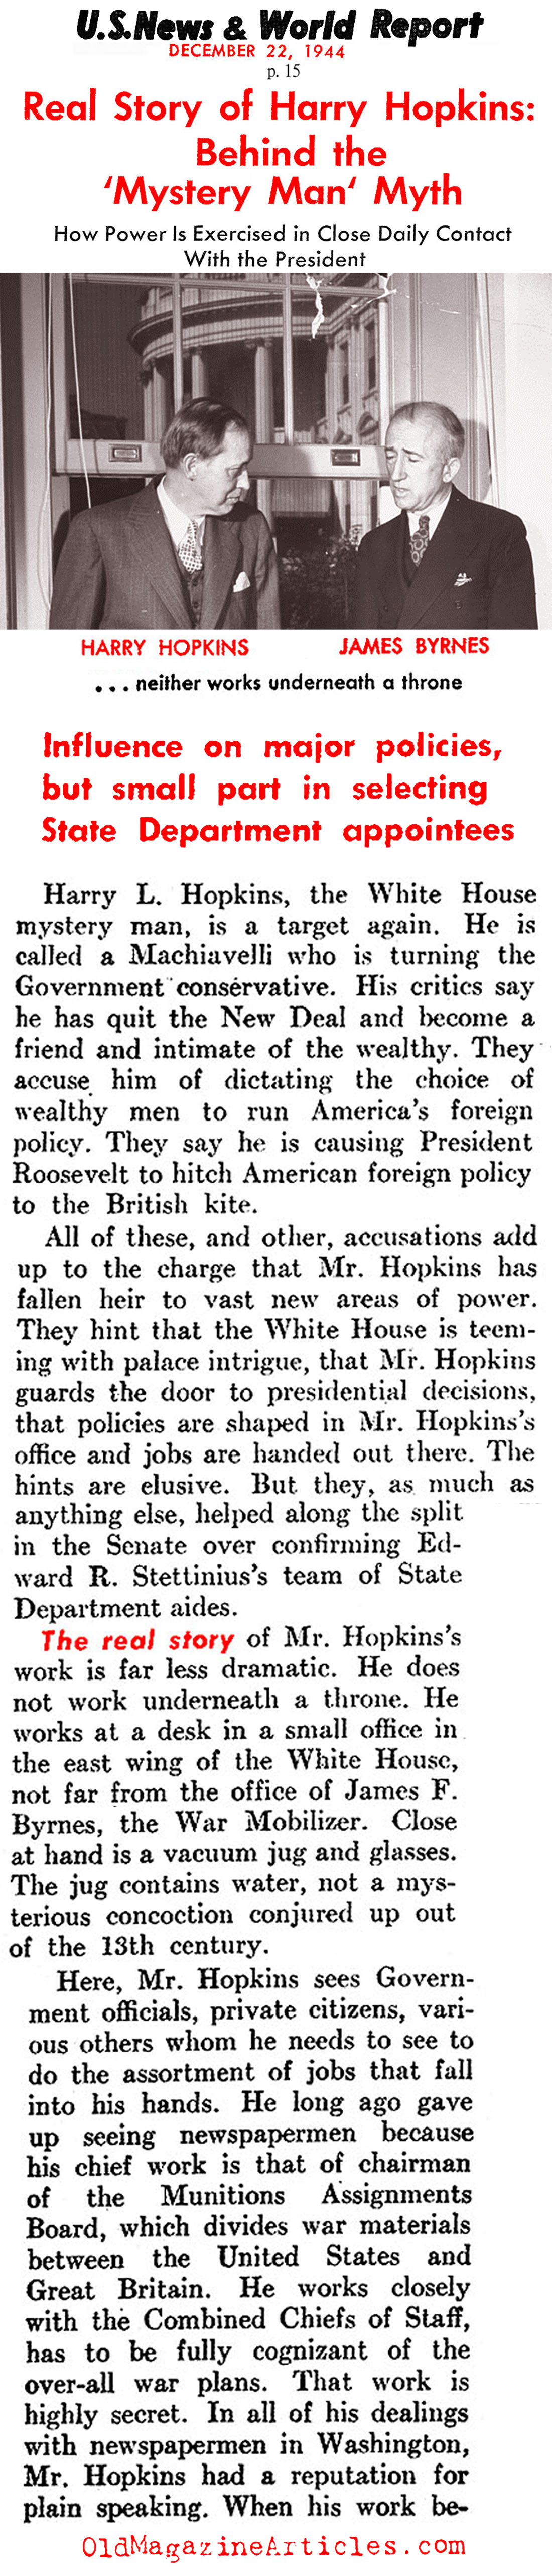 Harry Hopkins - FDR's Right Hand (United States News, 1944)